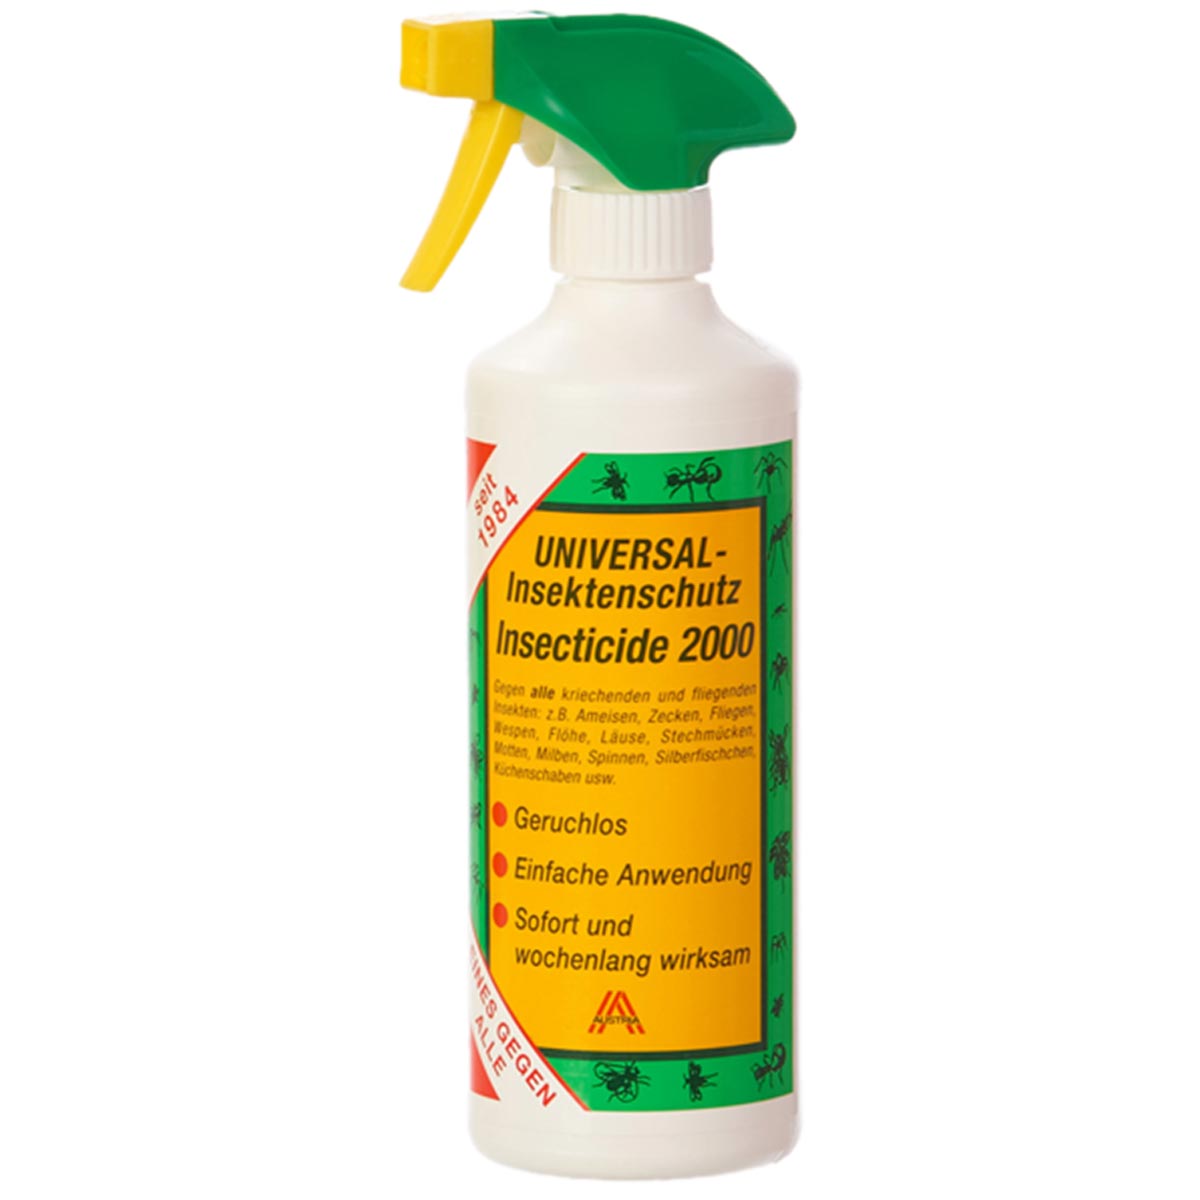 Insecticide 2000 - universal pest control 500 ml